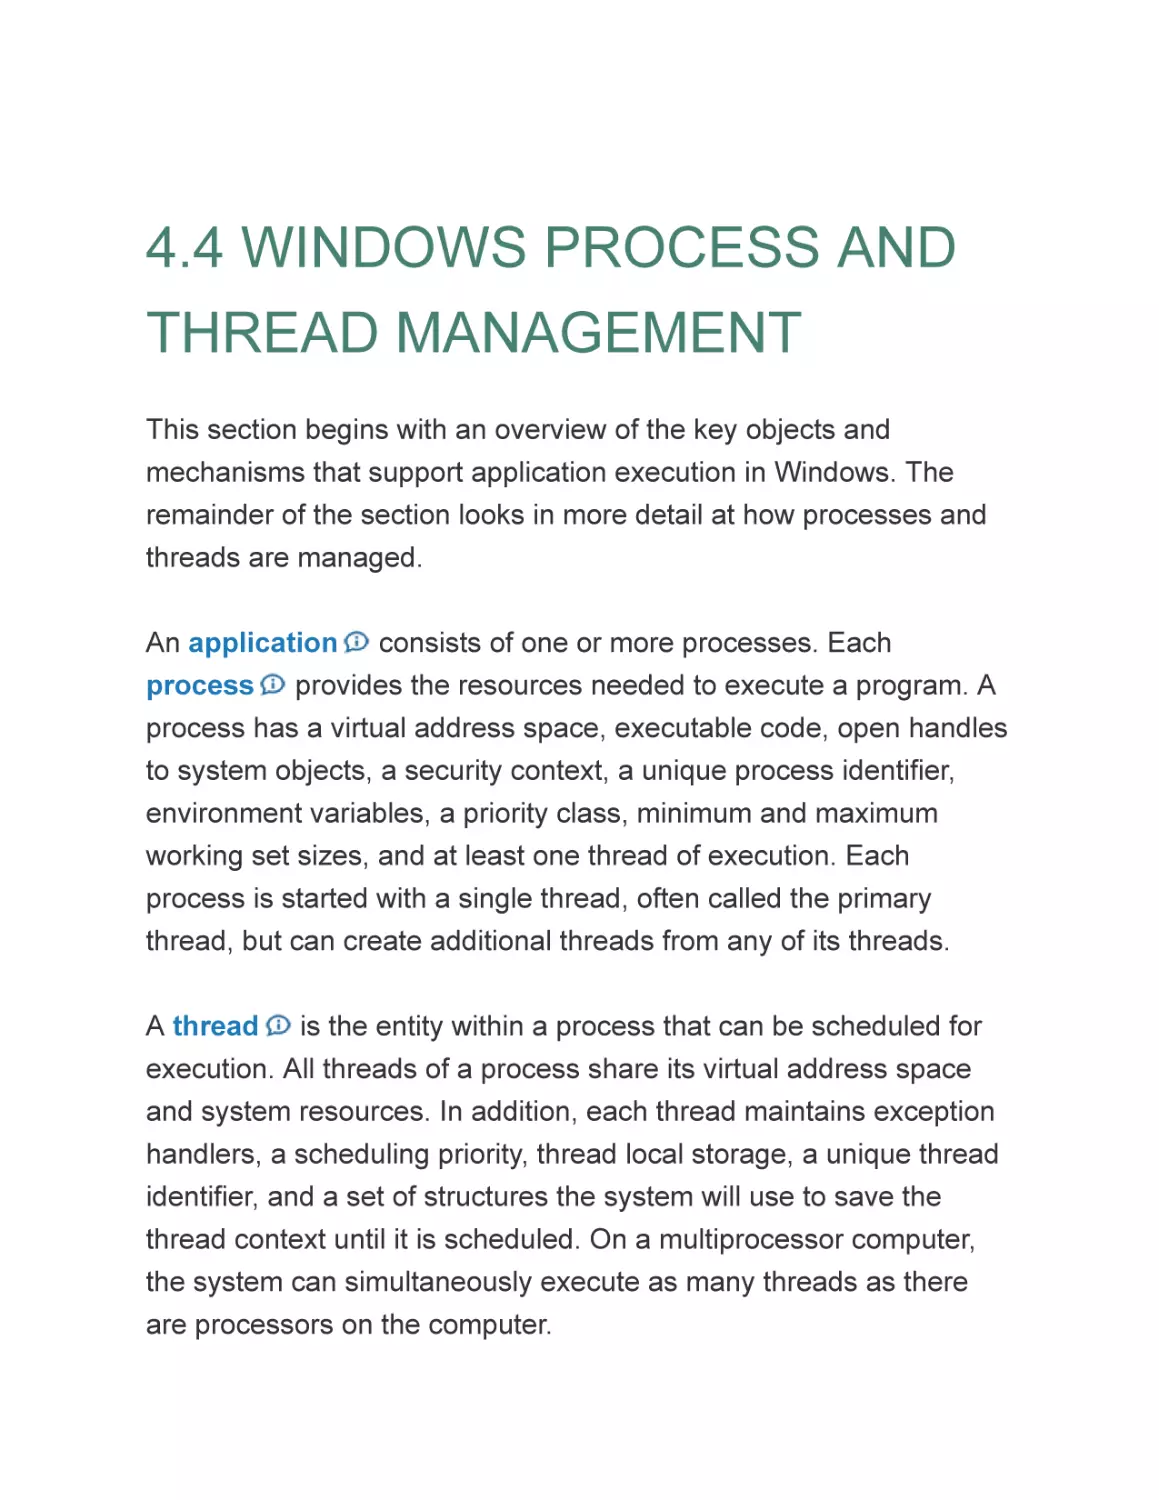 4.4 WINDOWS PROCESS AND THREAD MANAGEMENT